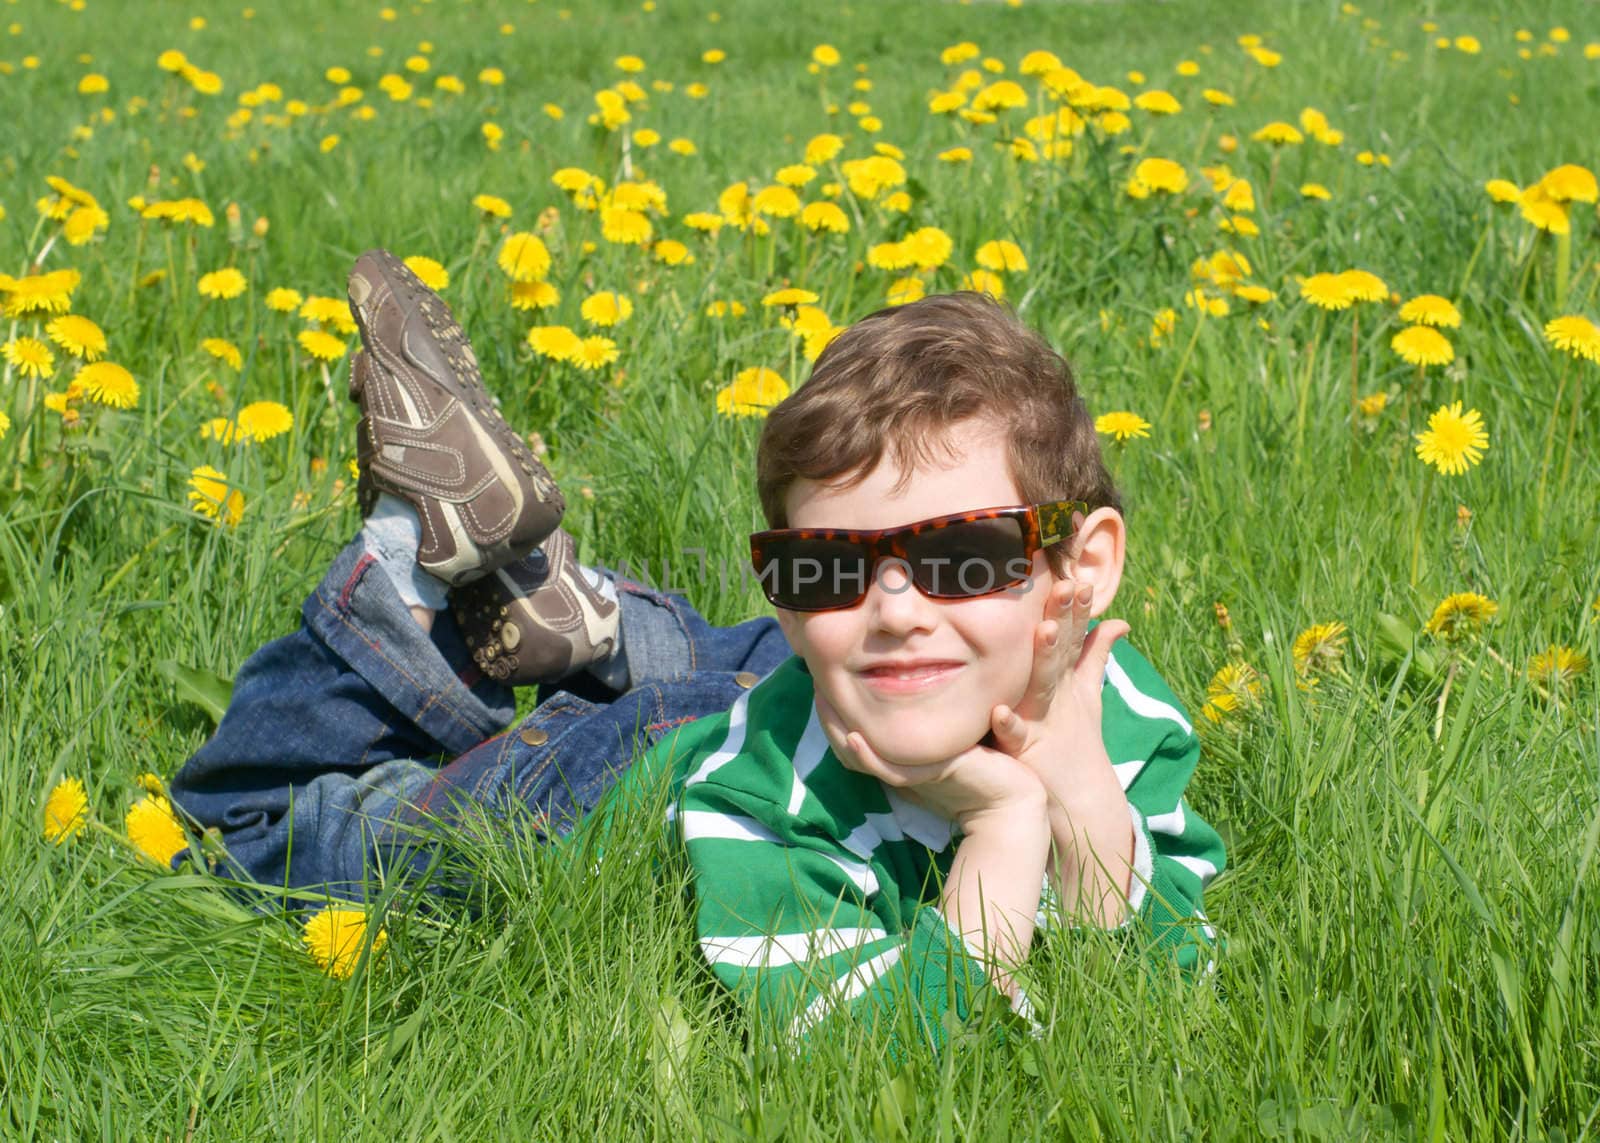 The boy is on the grass with dandelions